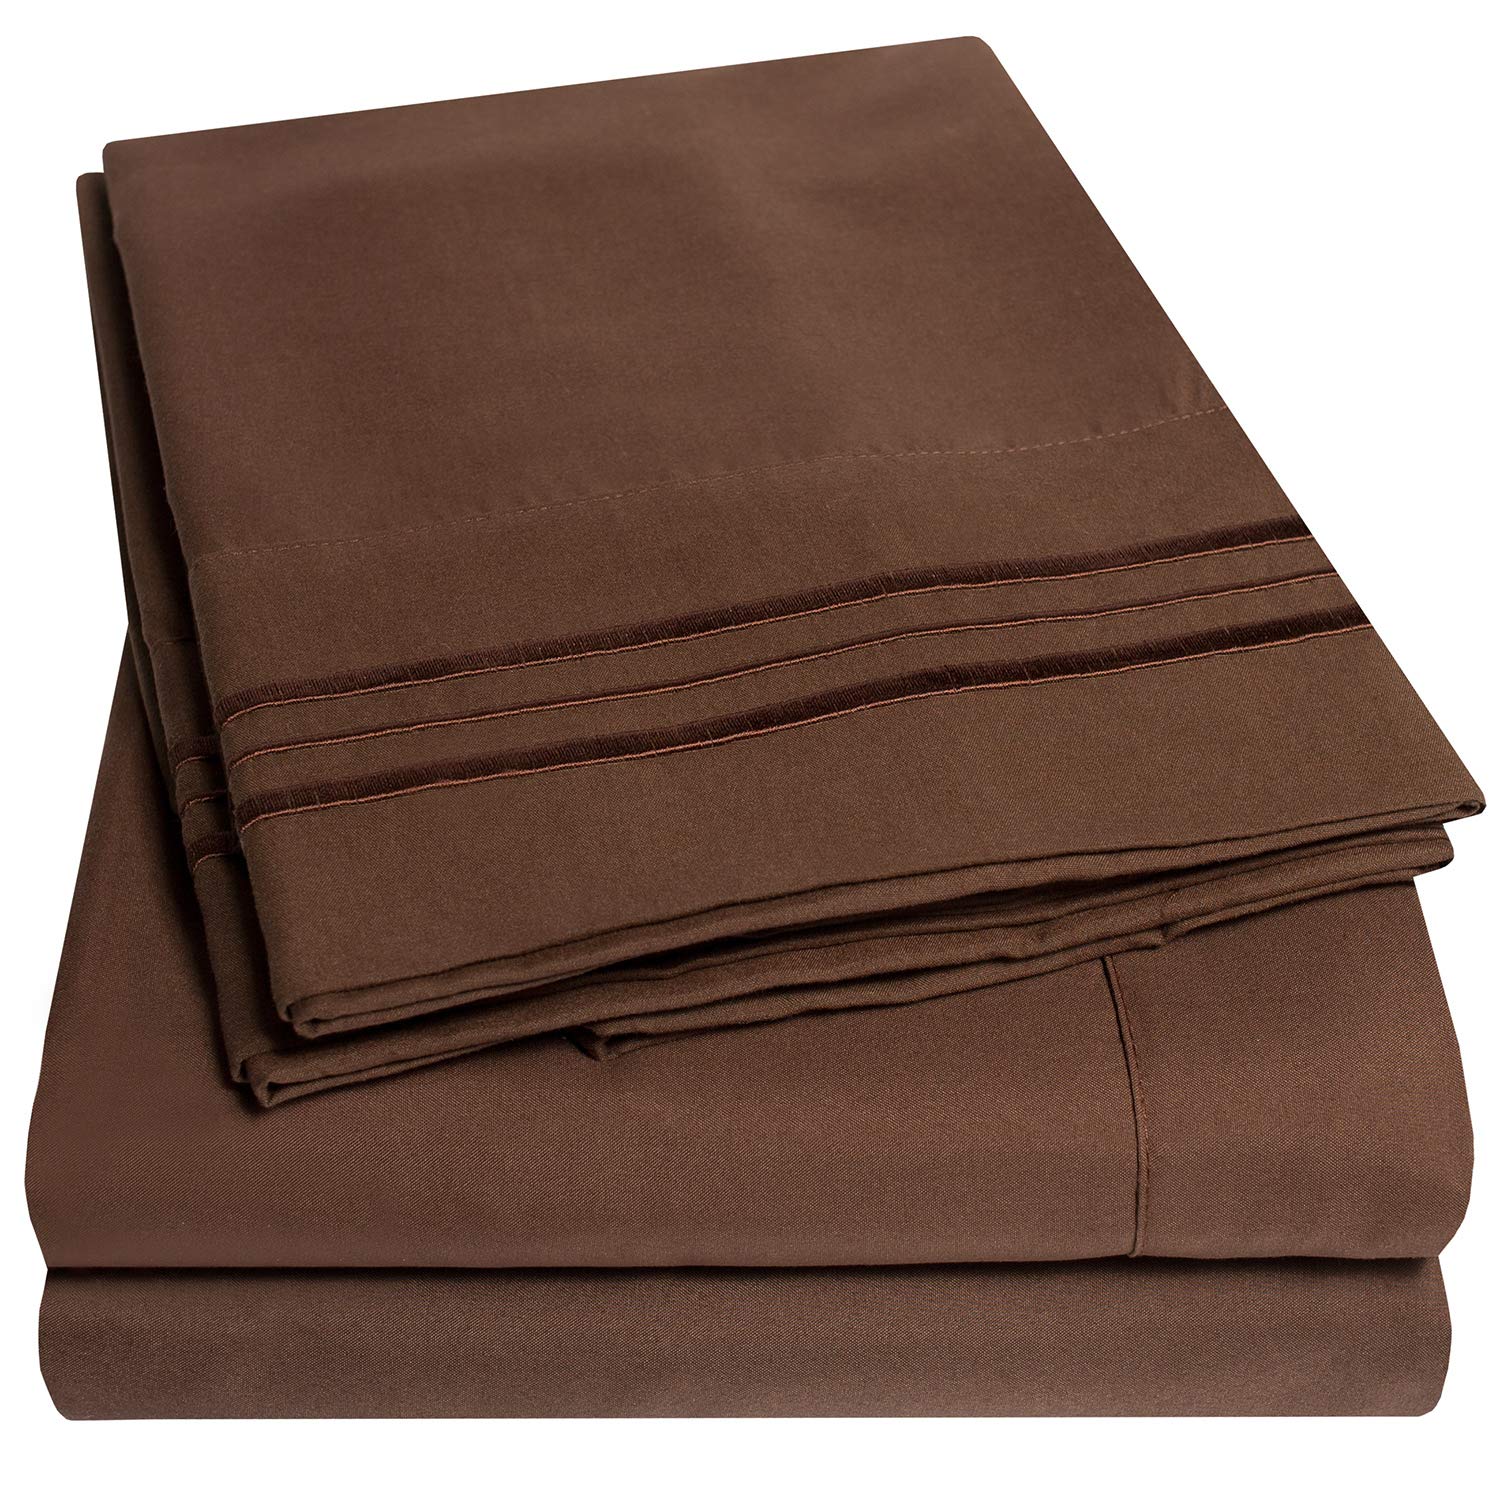 Book Cover 1500 Supreme Collection King Sheet Sets Brown - Luxury Hotel Bed Sheets and Pillowcase Set for King Mattress - Extra Soft, Elastic Corner Straps, Deep Pocket Sheets, King Brown